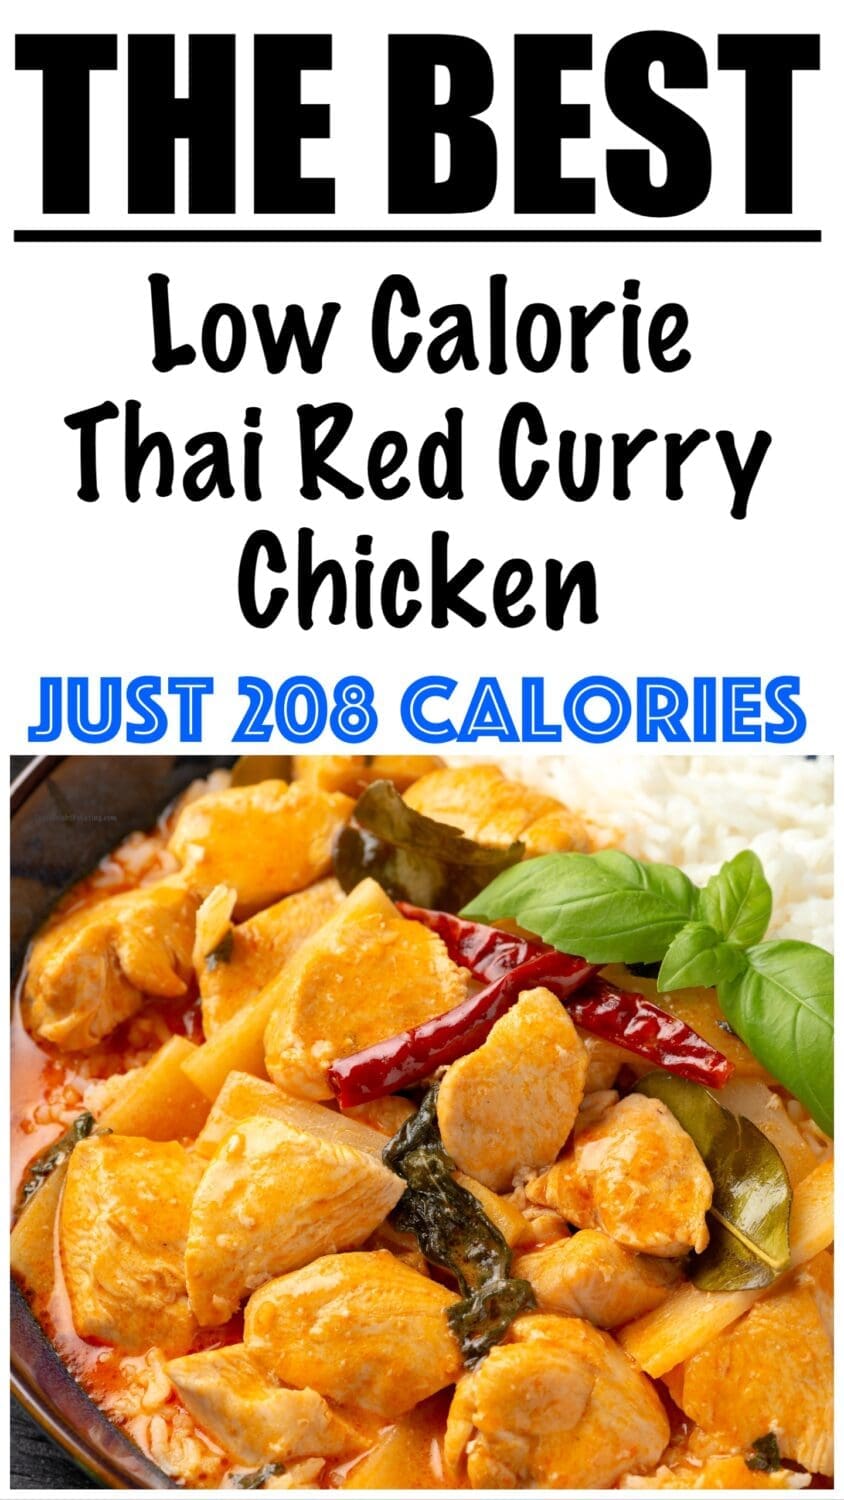 Low Calorie Thai Red Curry Chicken Recipe